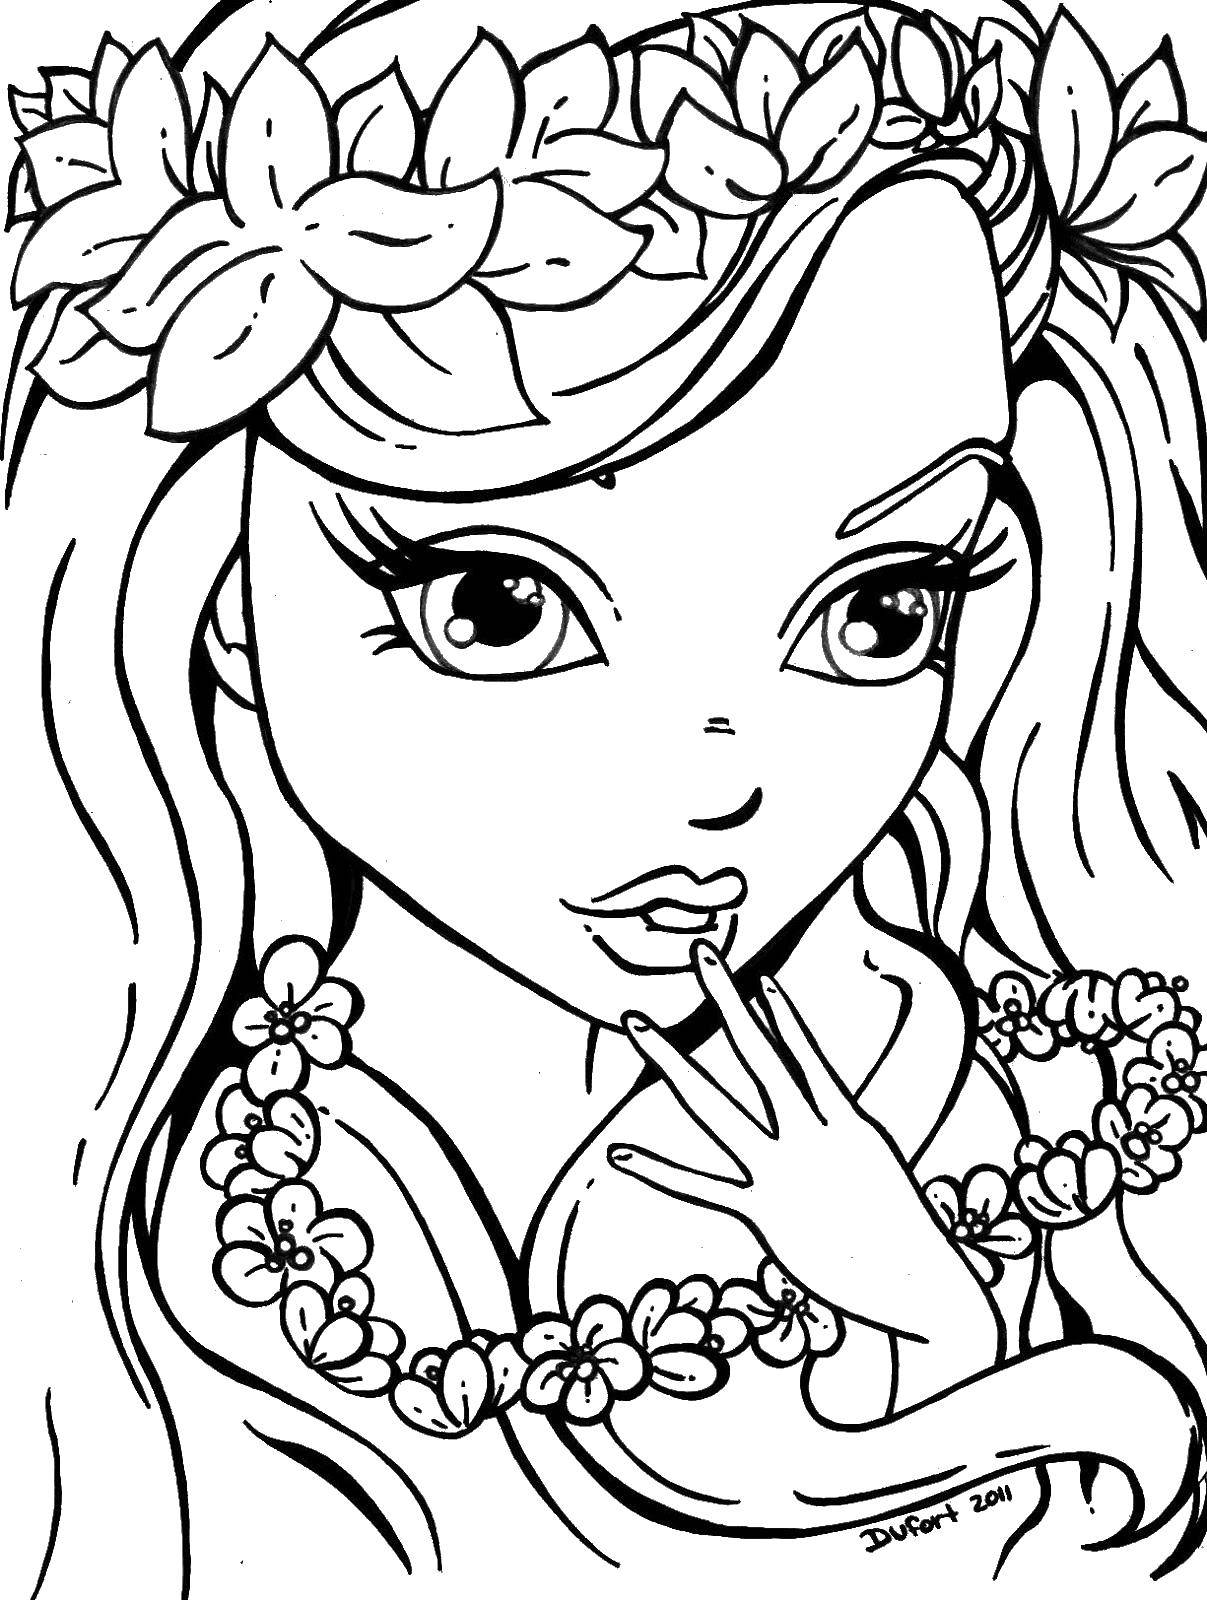 Coloring Barbie in a wreath of flowers. Category Barbie . Tags:  Barbie , flowers, wreath.